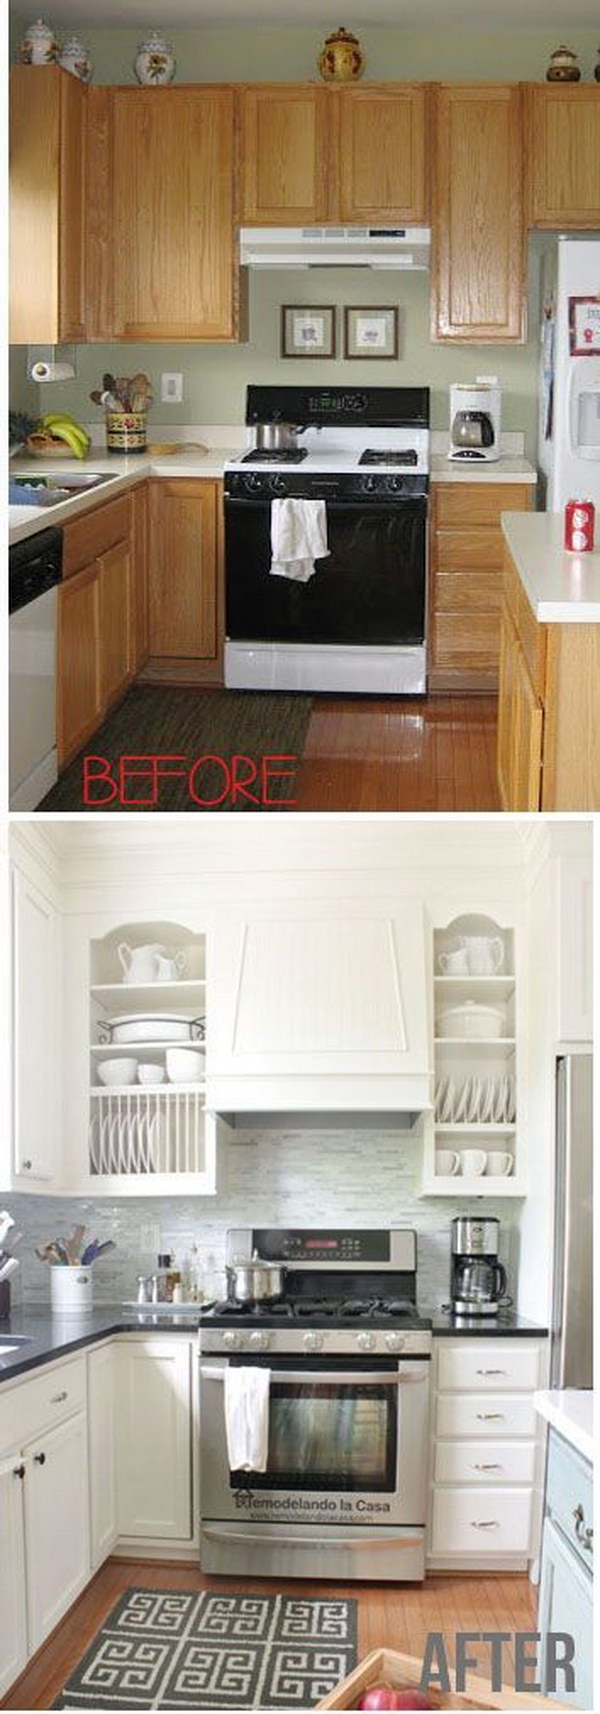 Kitchen Makeover With White Painted Cabinets. 